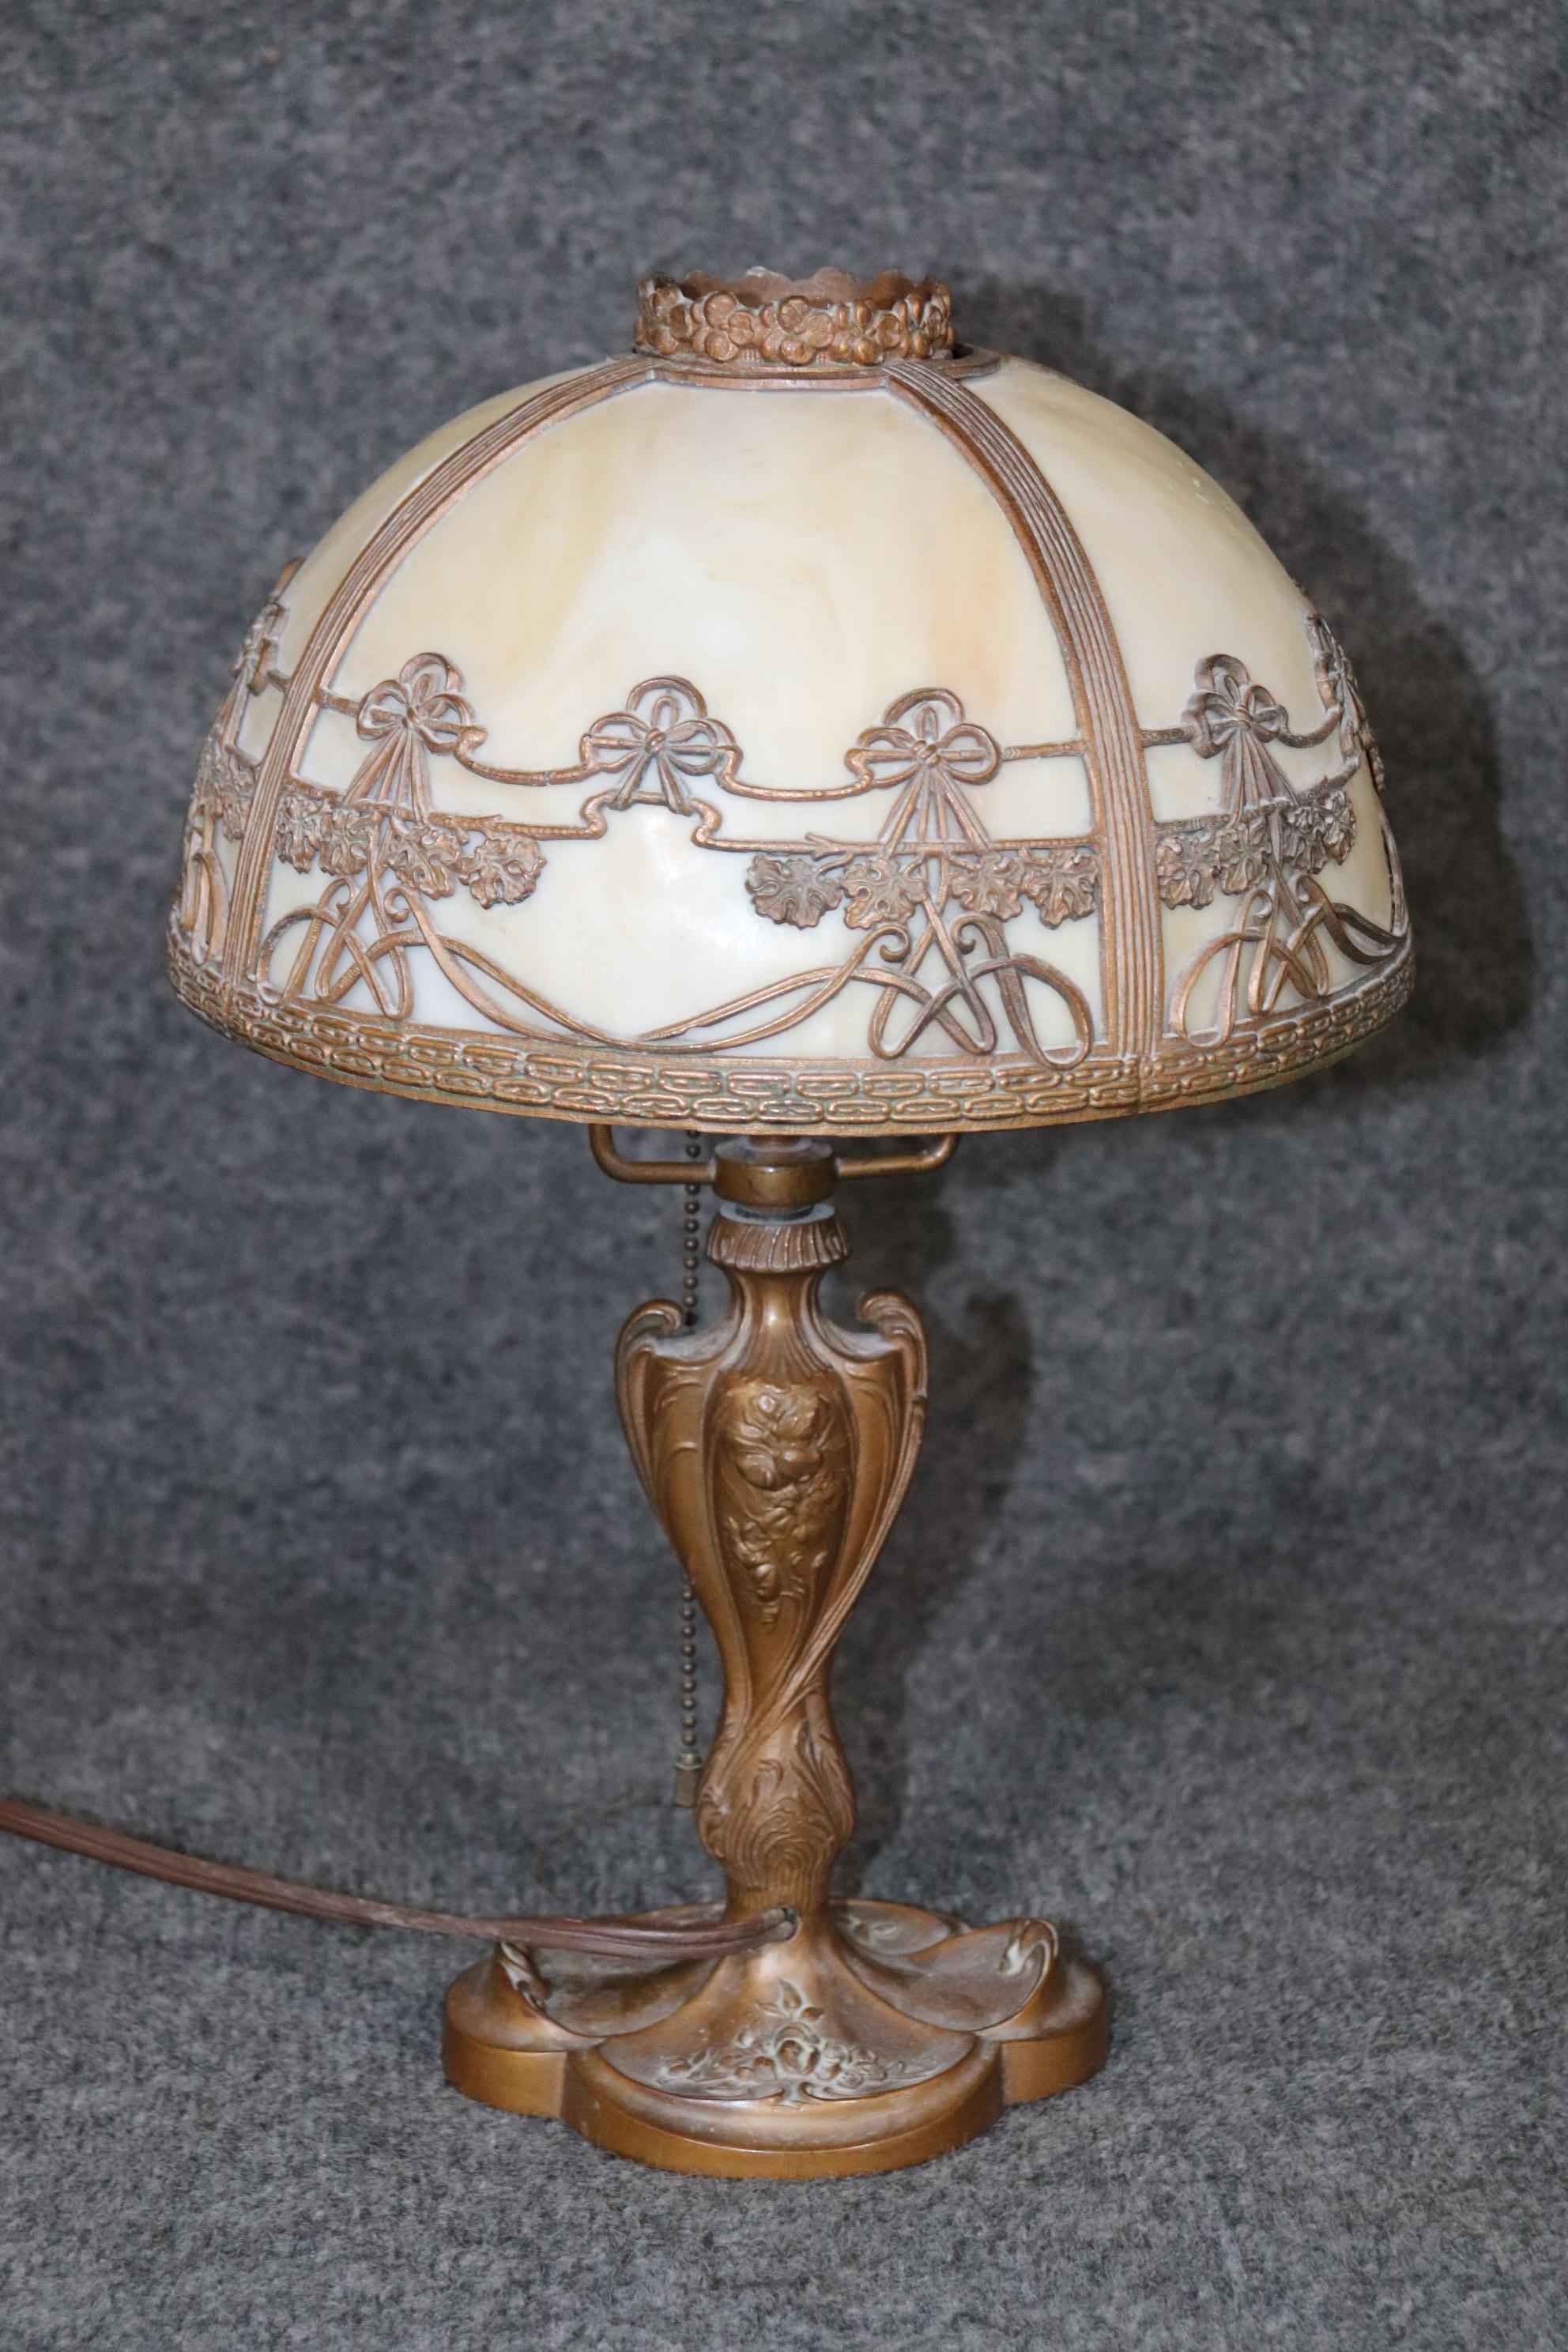 Early 20th Century Nice American French Art Nouveau Style Slag Glass Lamp with Bronze Colored Base